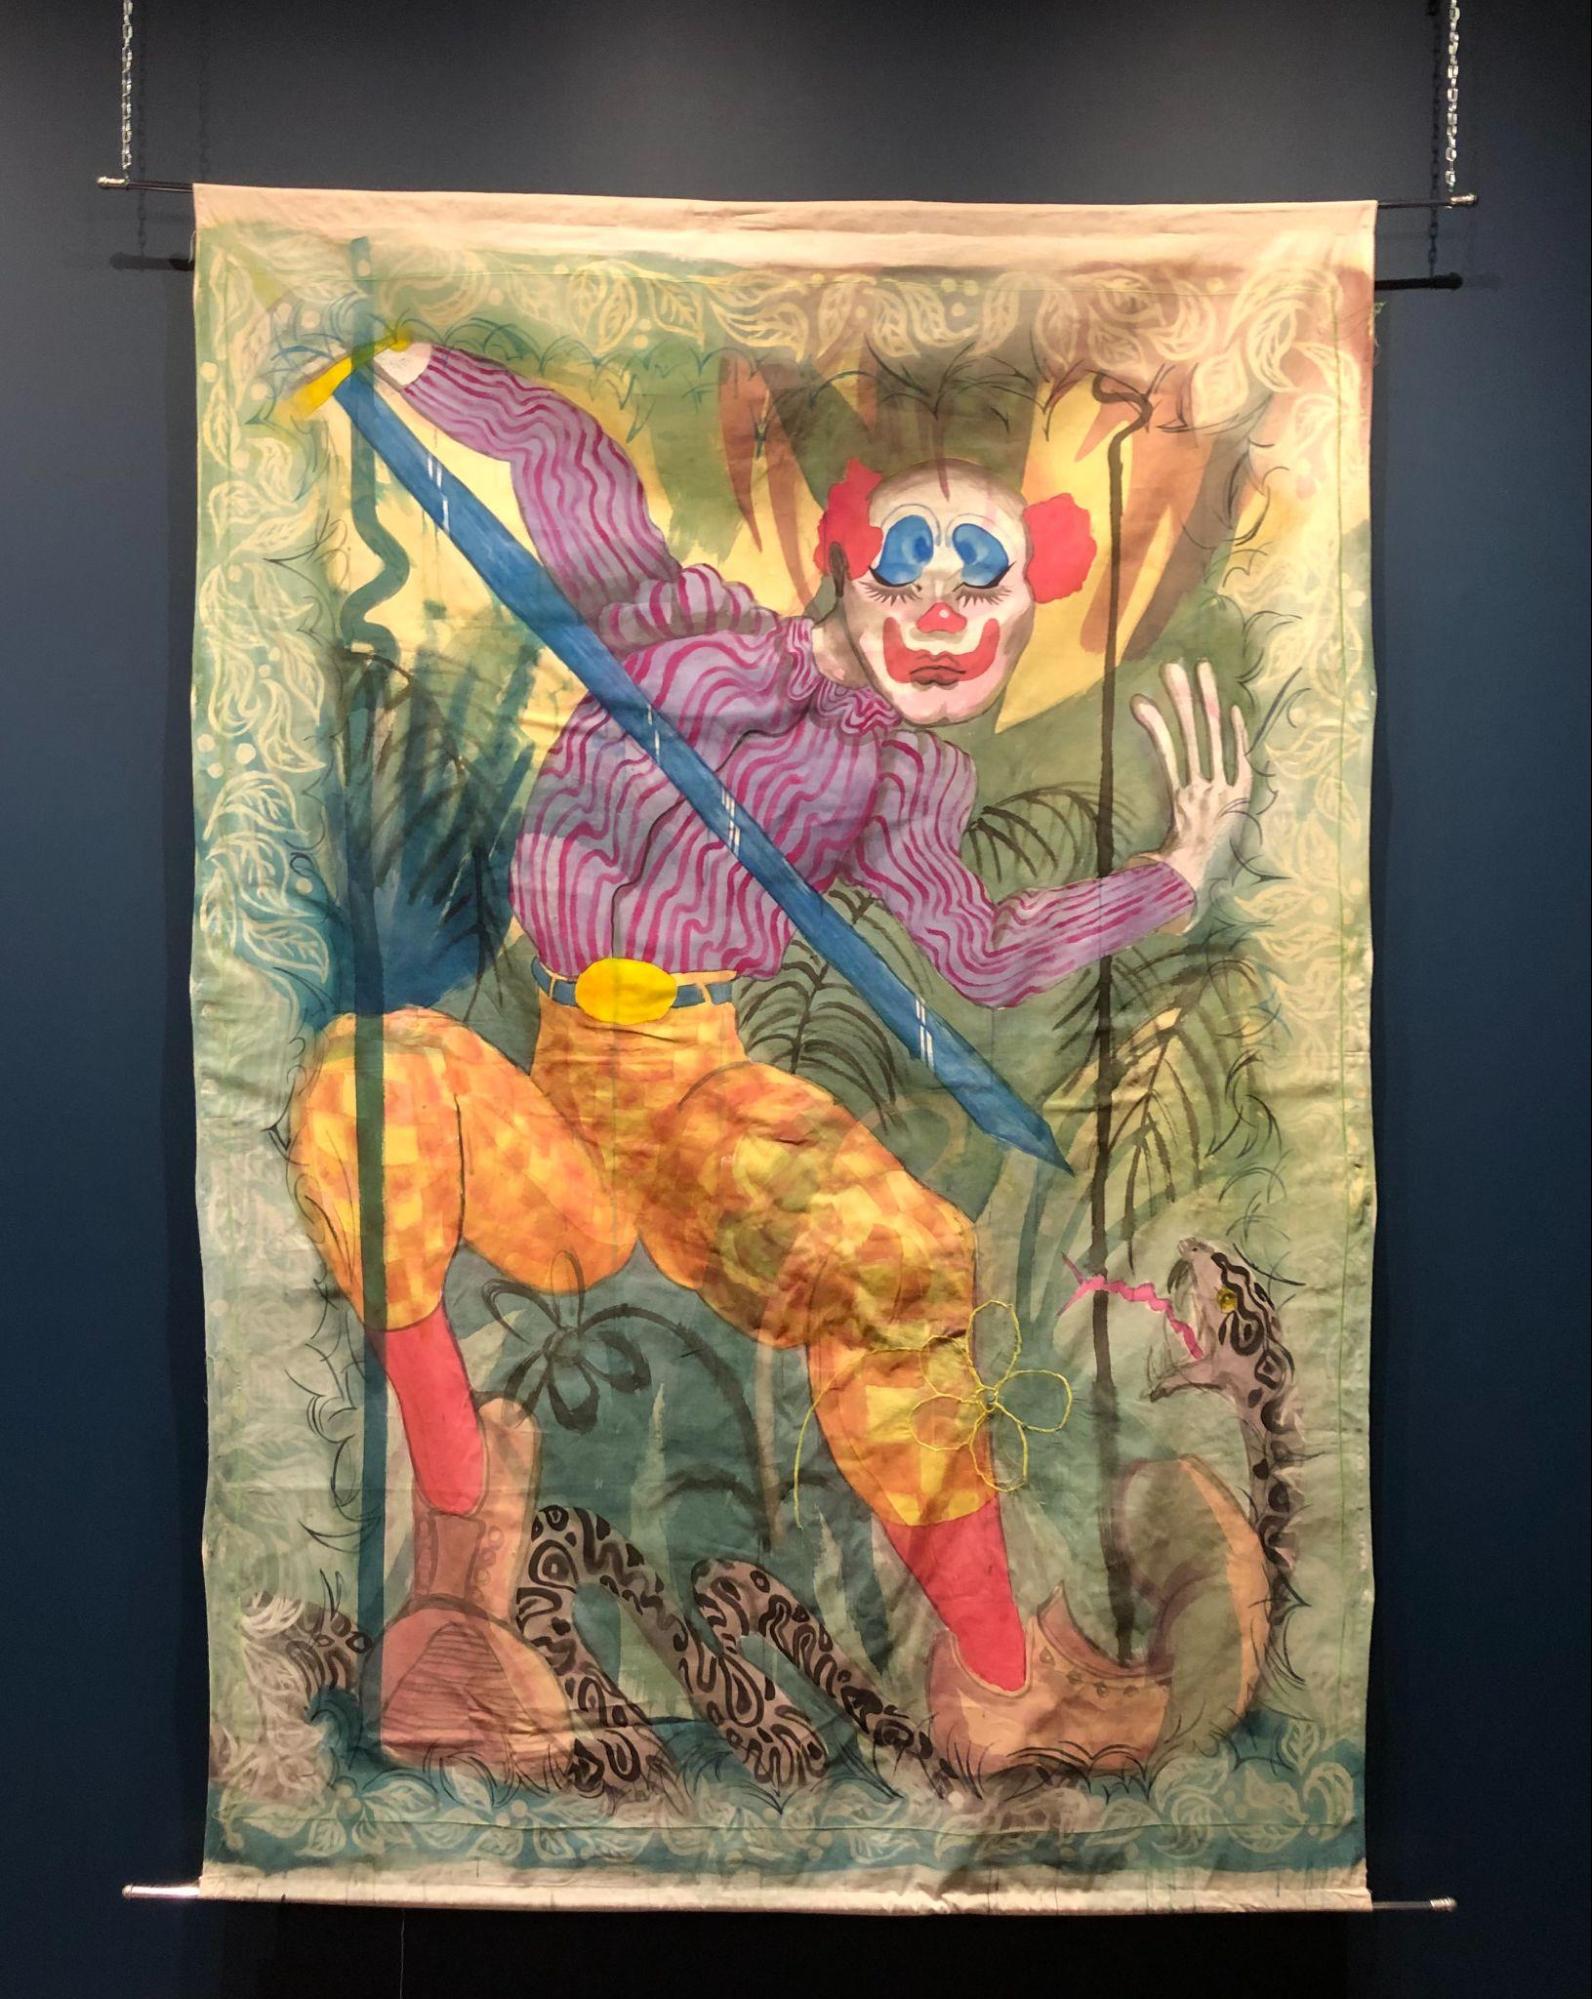 Payaso Miguel, 2021, ink, dye and embroidery on muslin, 60” x 88”